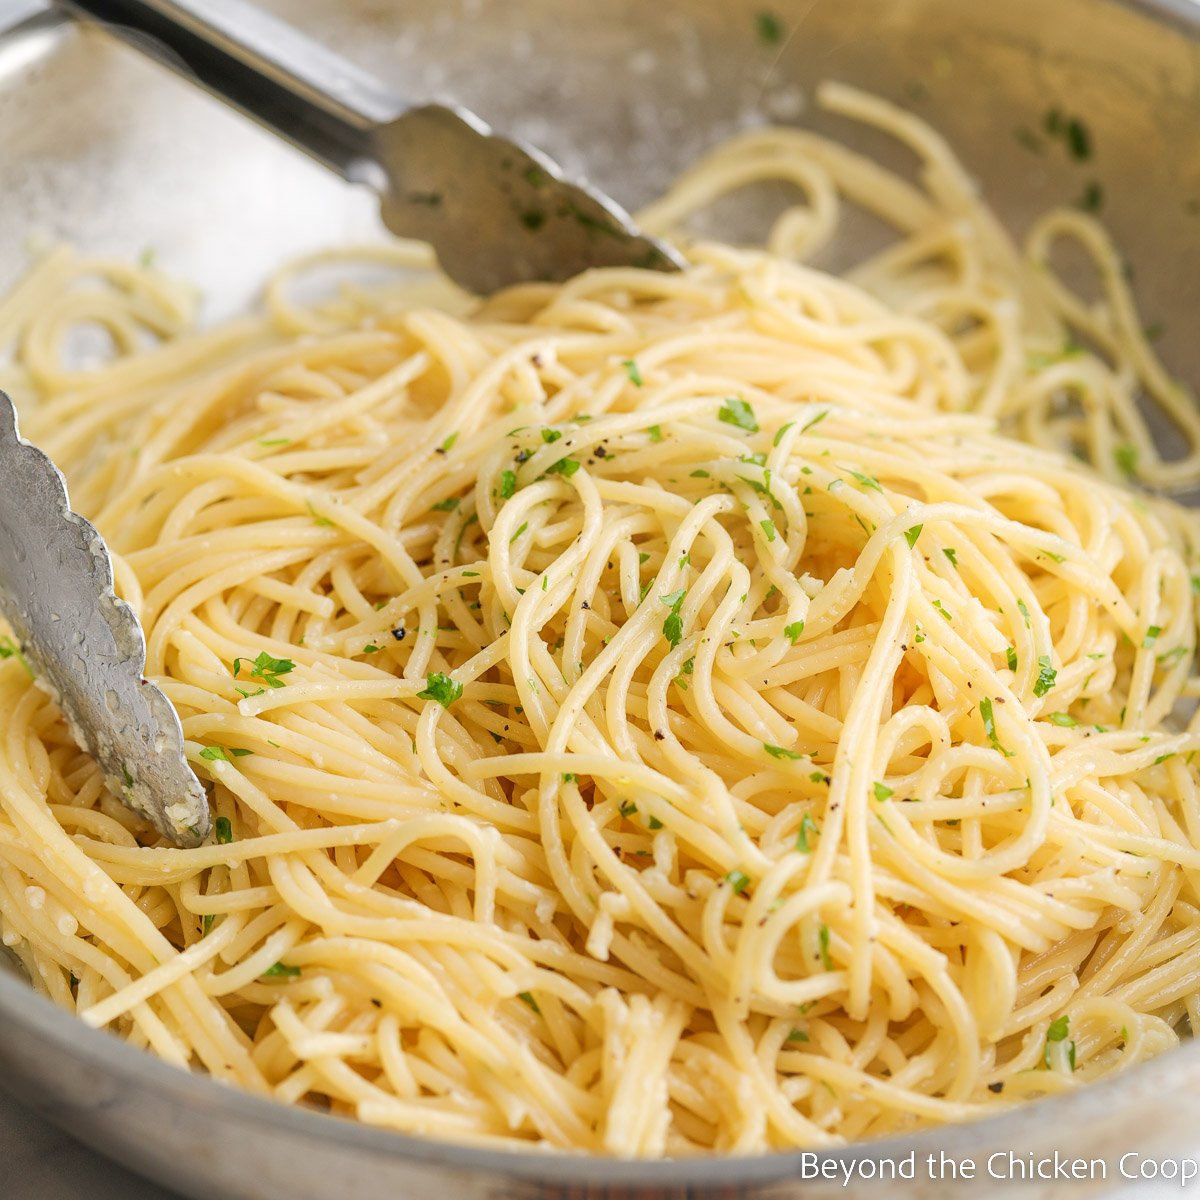 Pasta sprinkled with parsley in a pan.